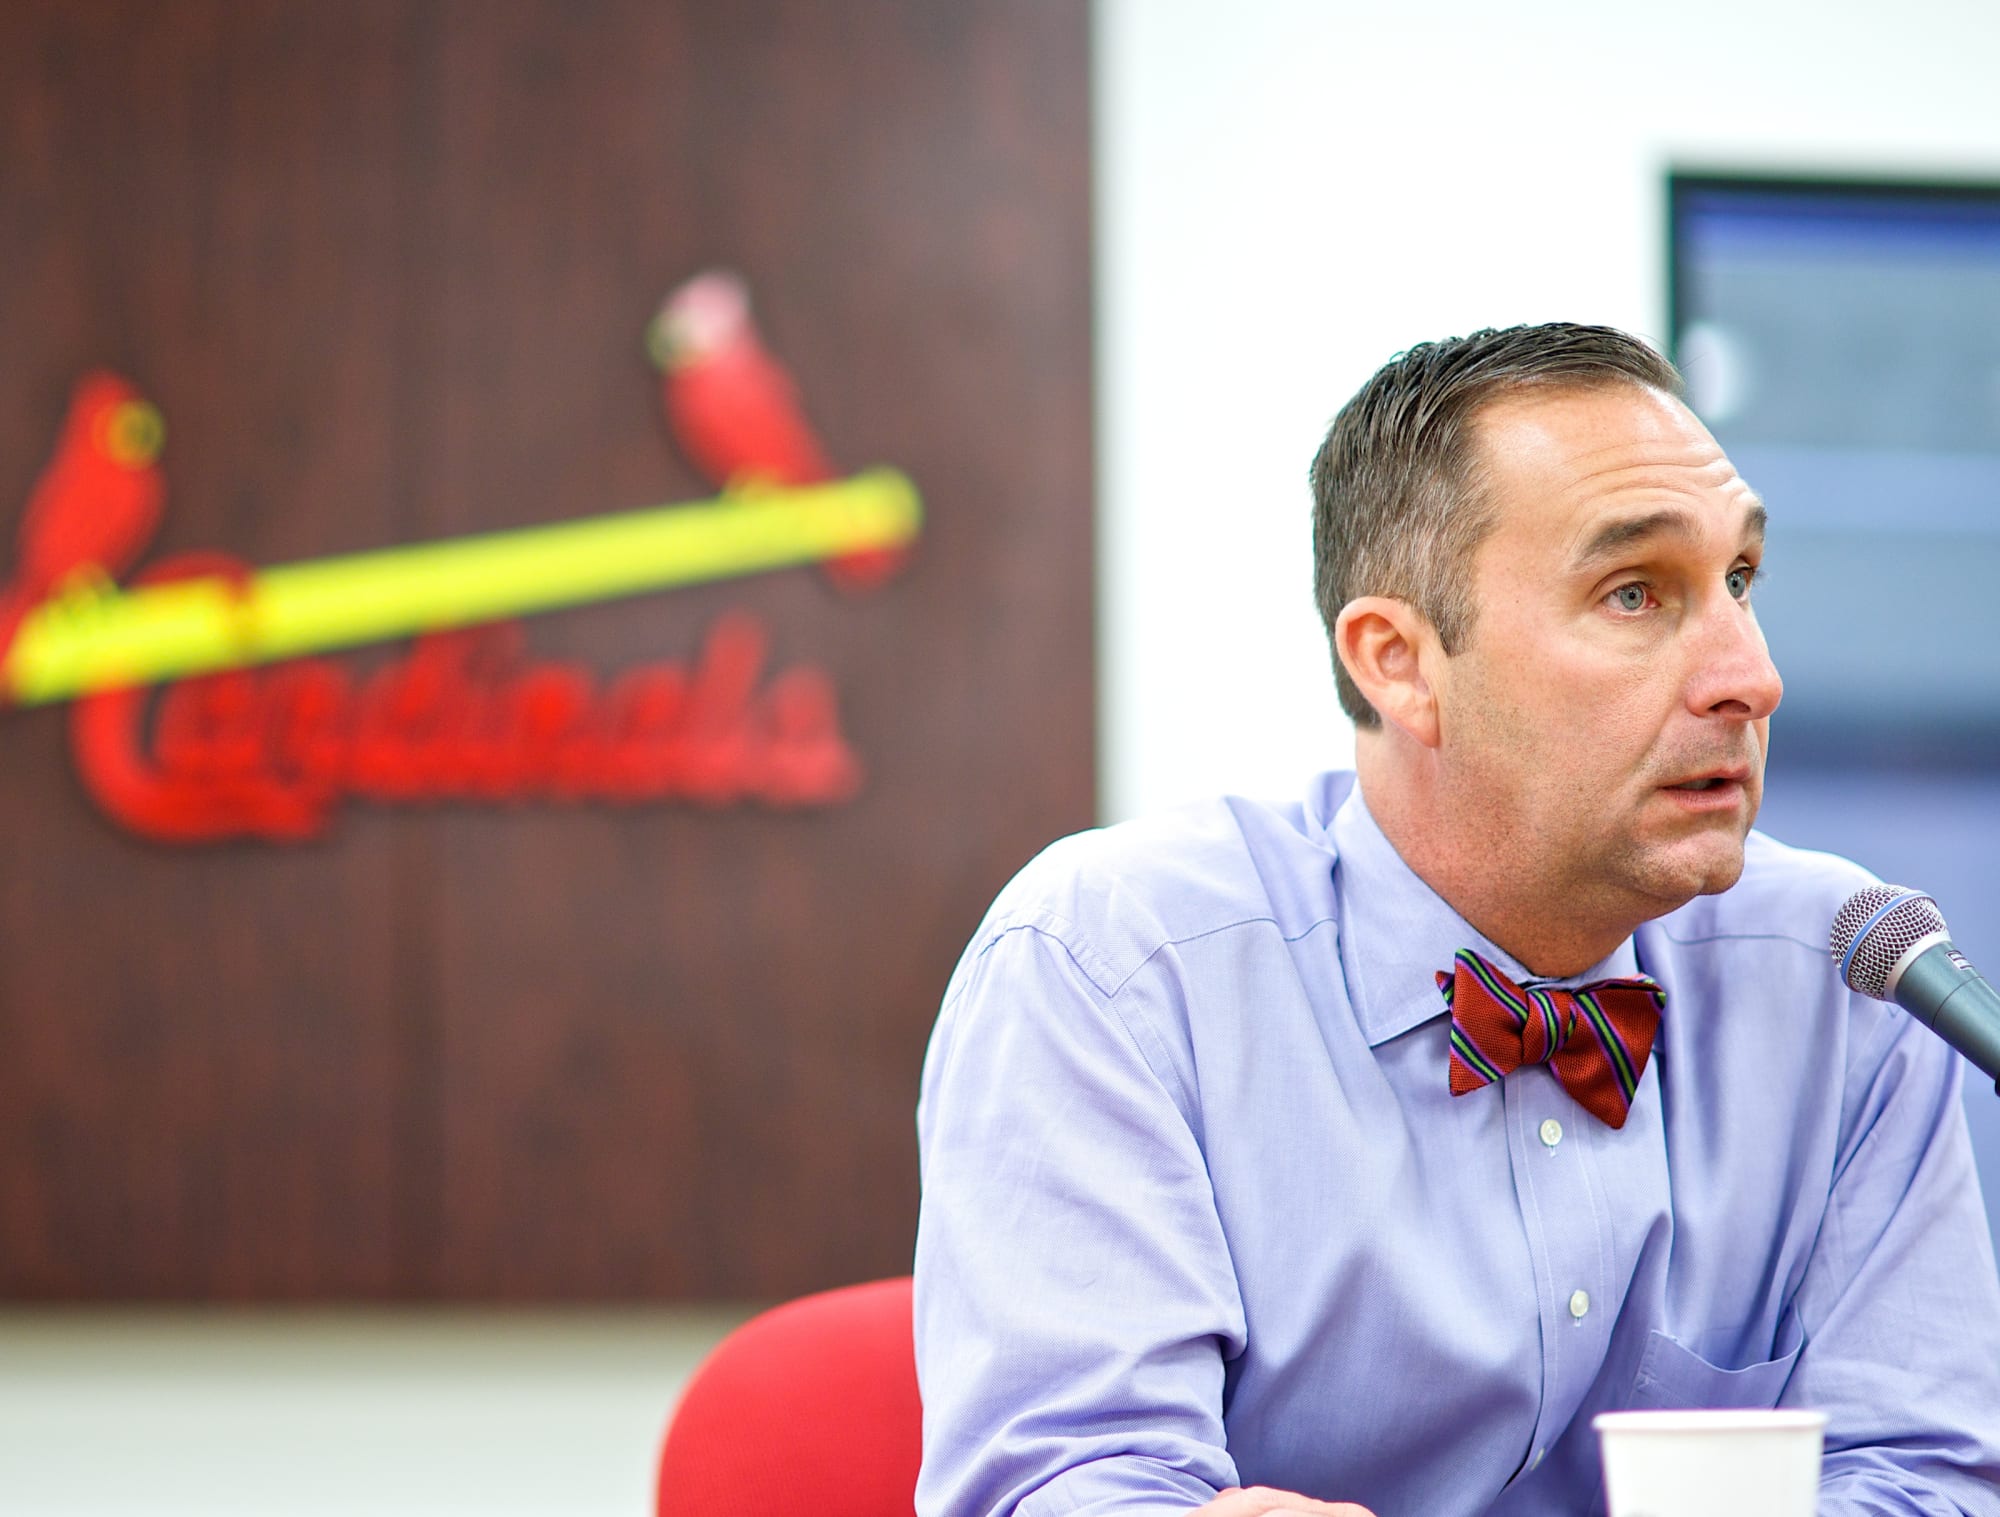 St. Louis Cardinals: MLB Draft date confirmed, but not much more